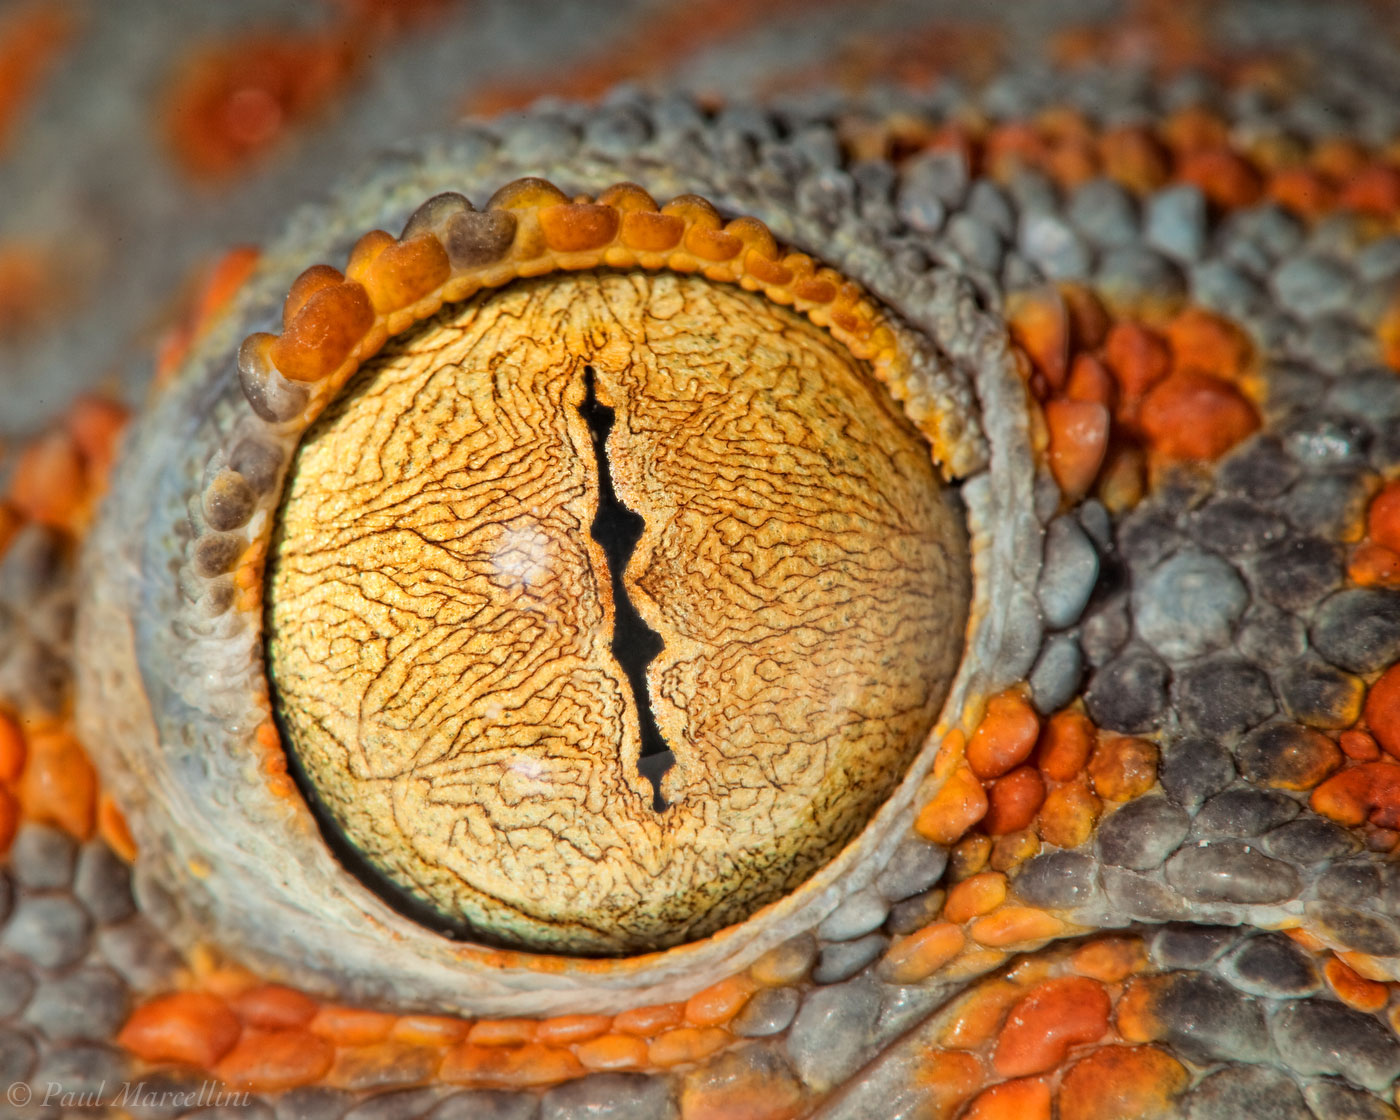 The Tokay Gecko (Gecko gecko) is beautiful lizard introduced to Miami from Asia. Unfortunately they pose a threat to many native...